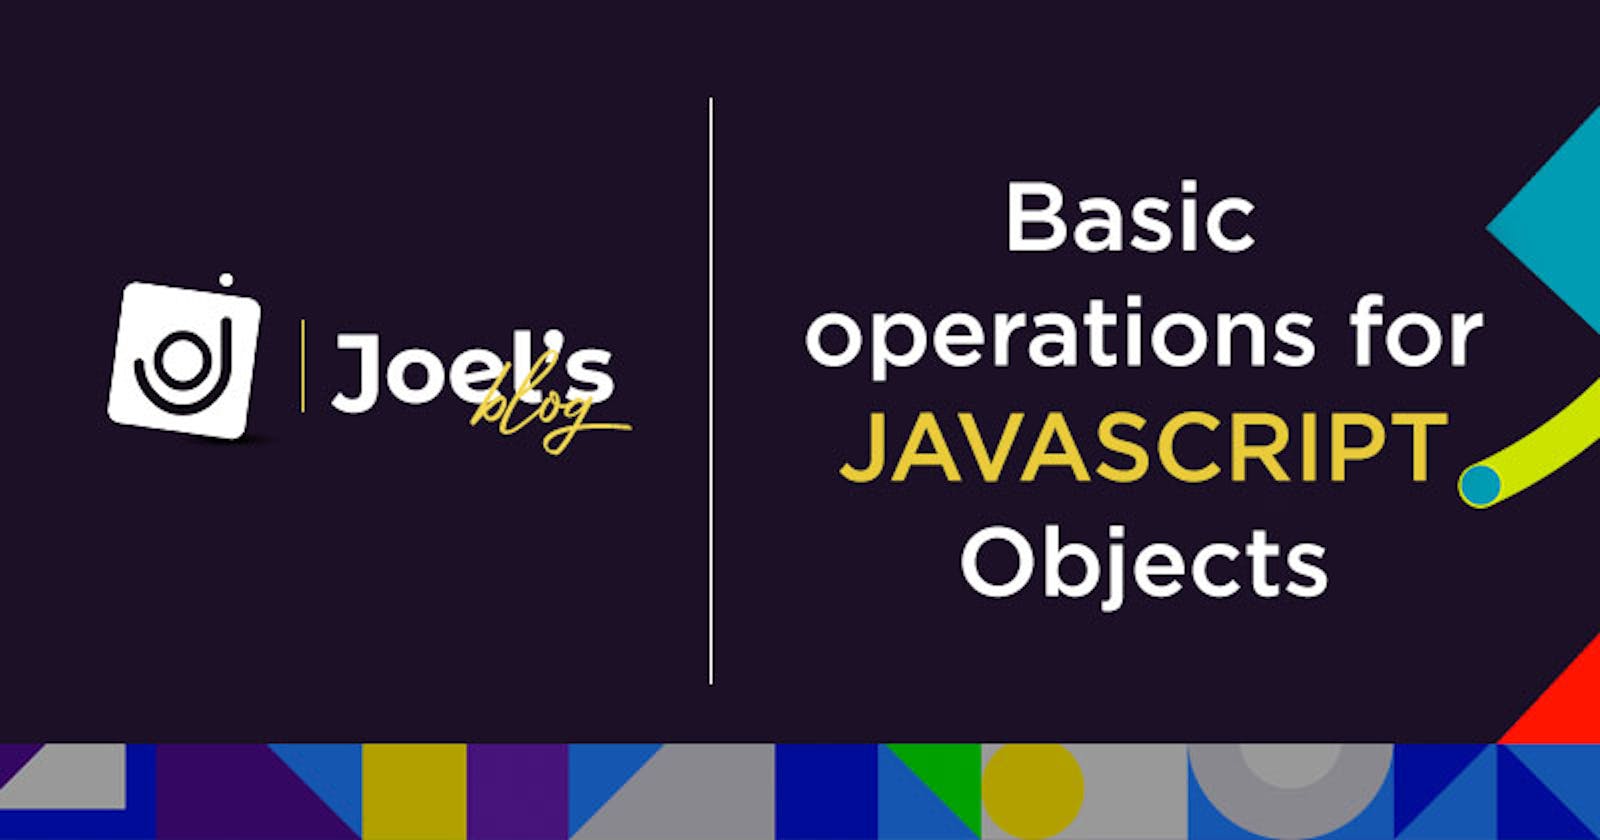 Basic Operation for Javascript Objects